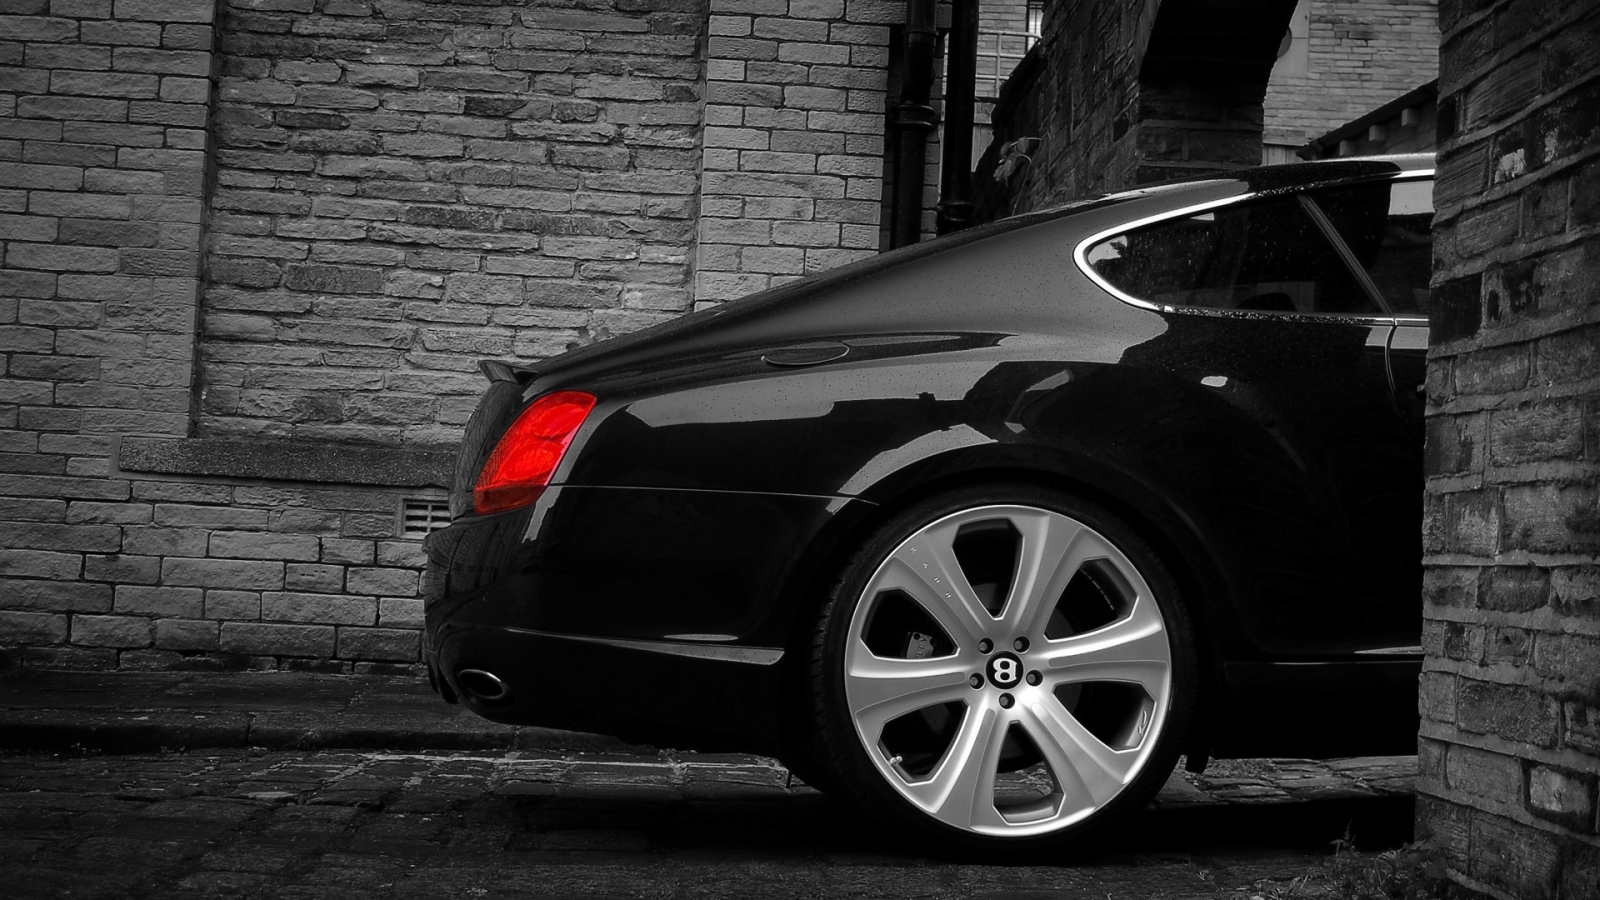 Bentley Continental GT S Project Kahn 2008 Rear for 1600 x 900 HDTV resolution